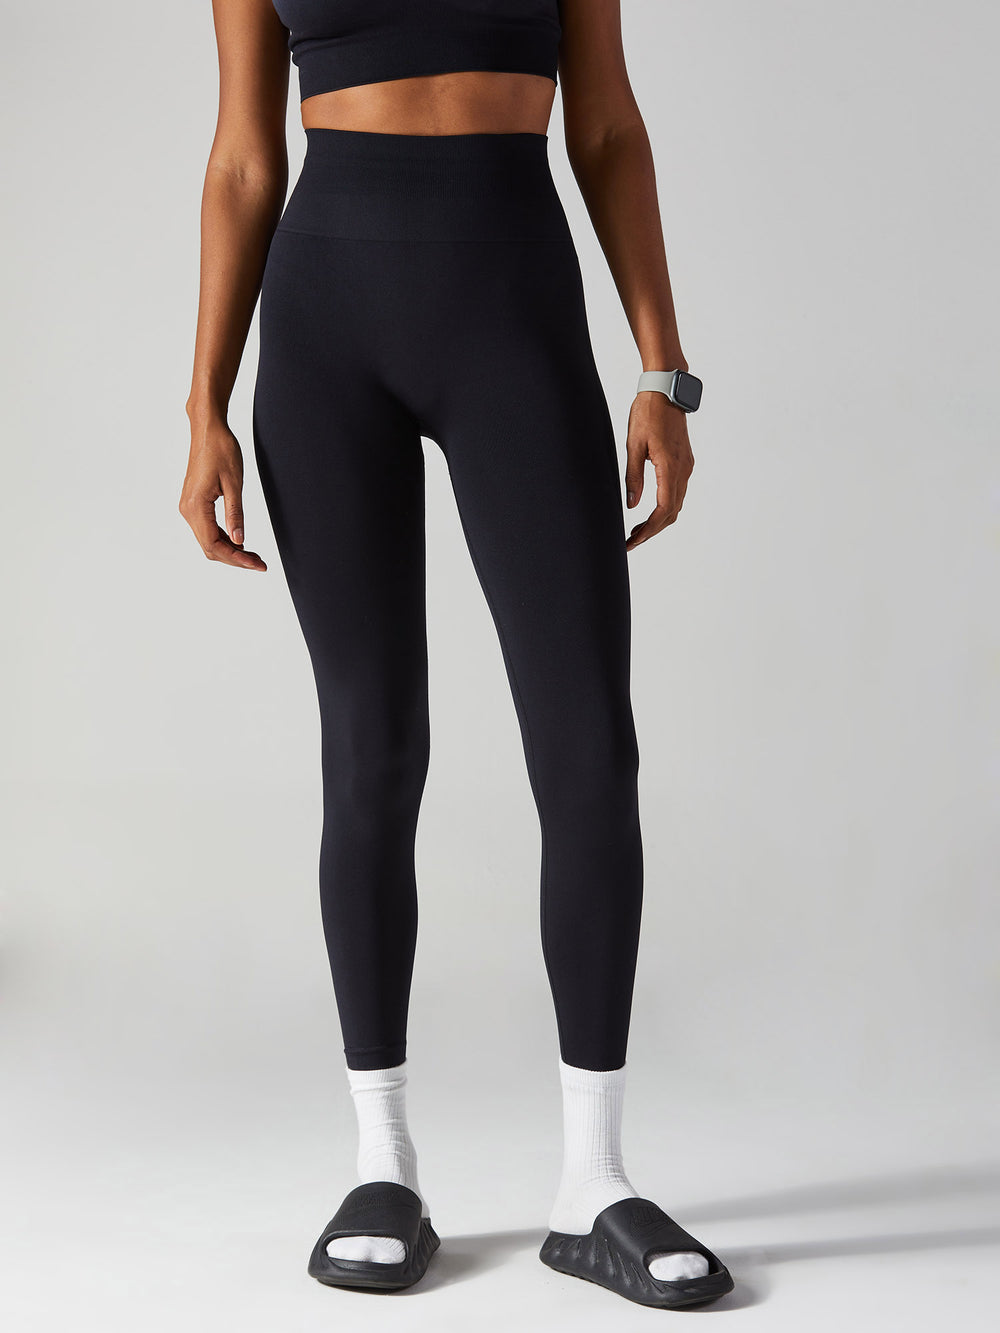 Buy Womens Lot 3 Leggings Calvin Cline, Nike, and Calia by Carrie Underwood  M and L Yoga Pants Online in India 